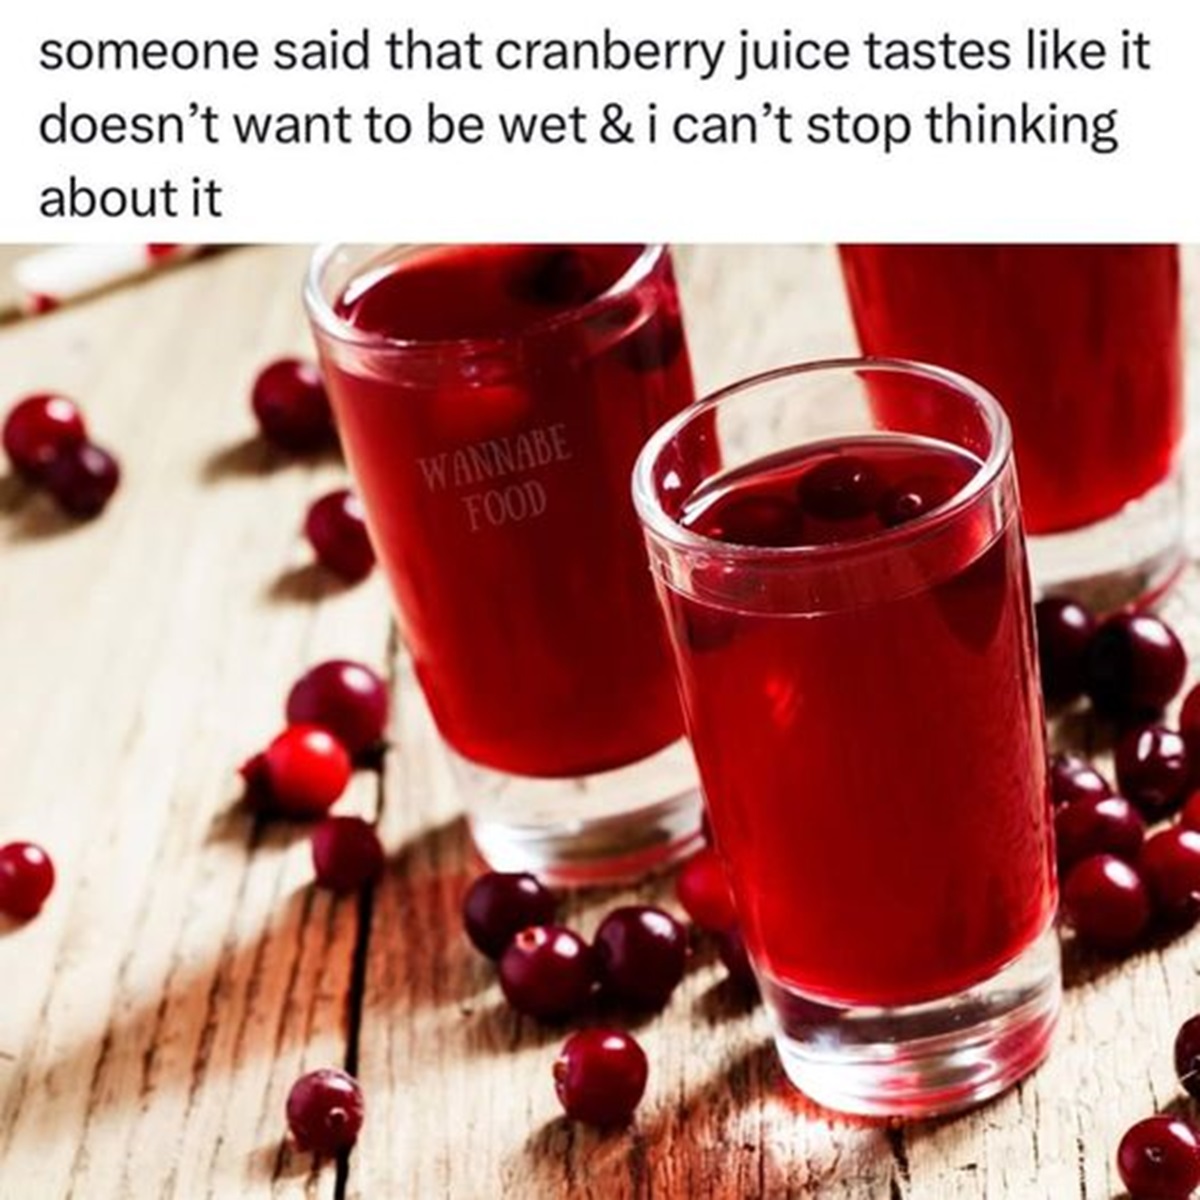 Cranberry juice - someone said that cranberry juice tastes it doesn't want to be wet & i can't stop thinking about it Wannabe Food